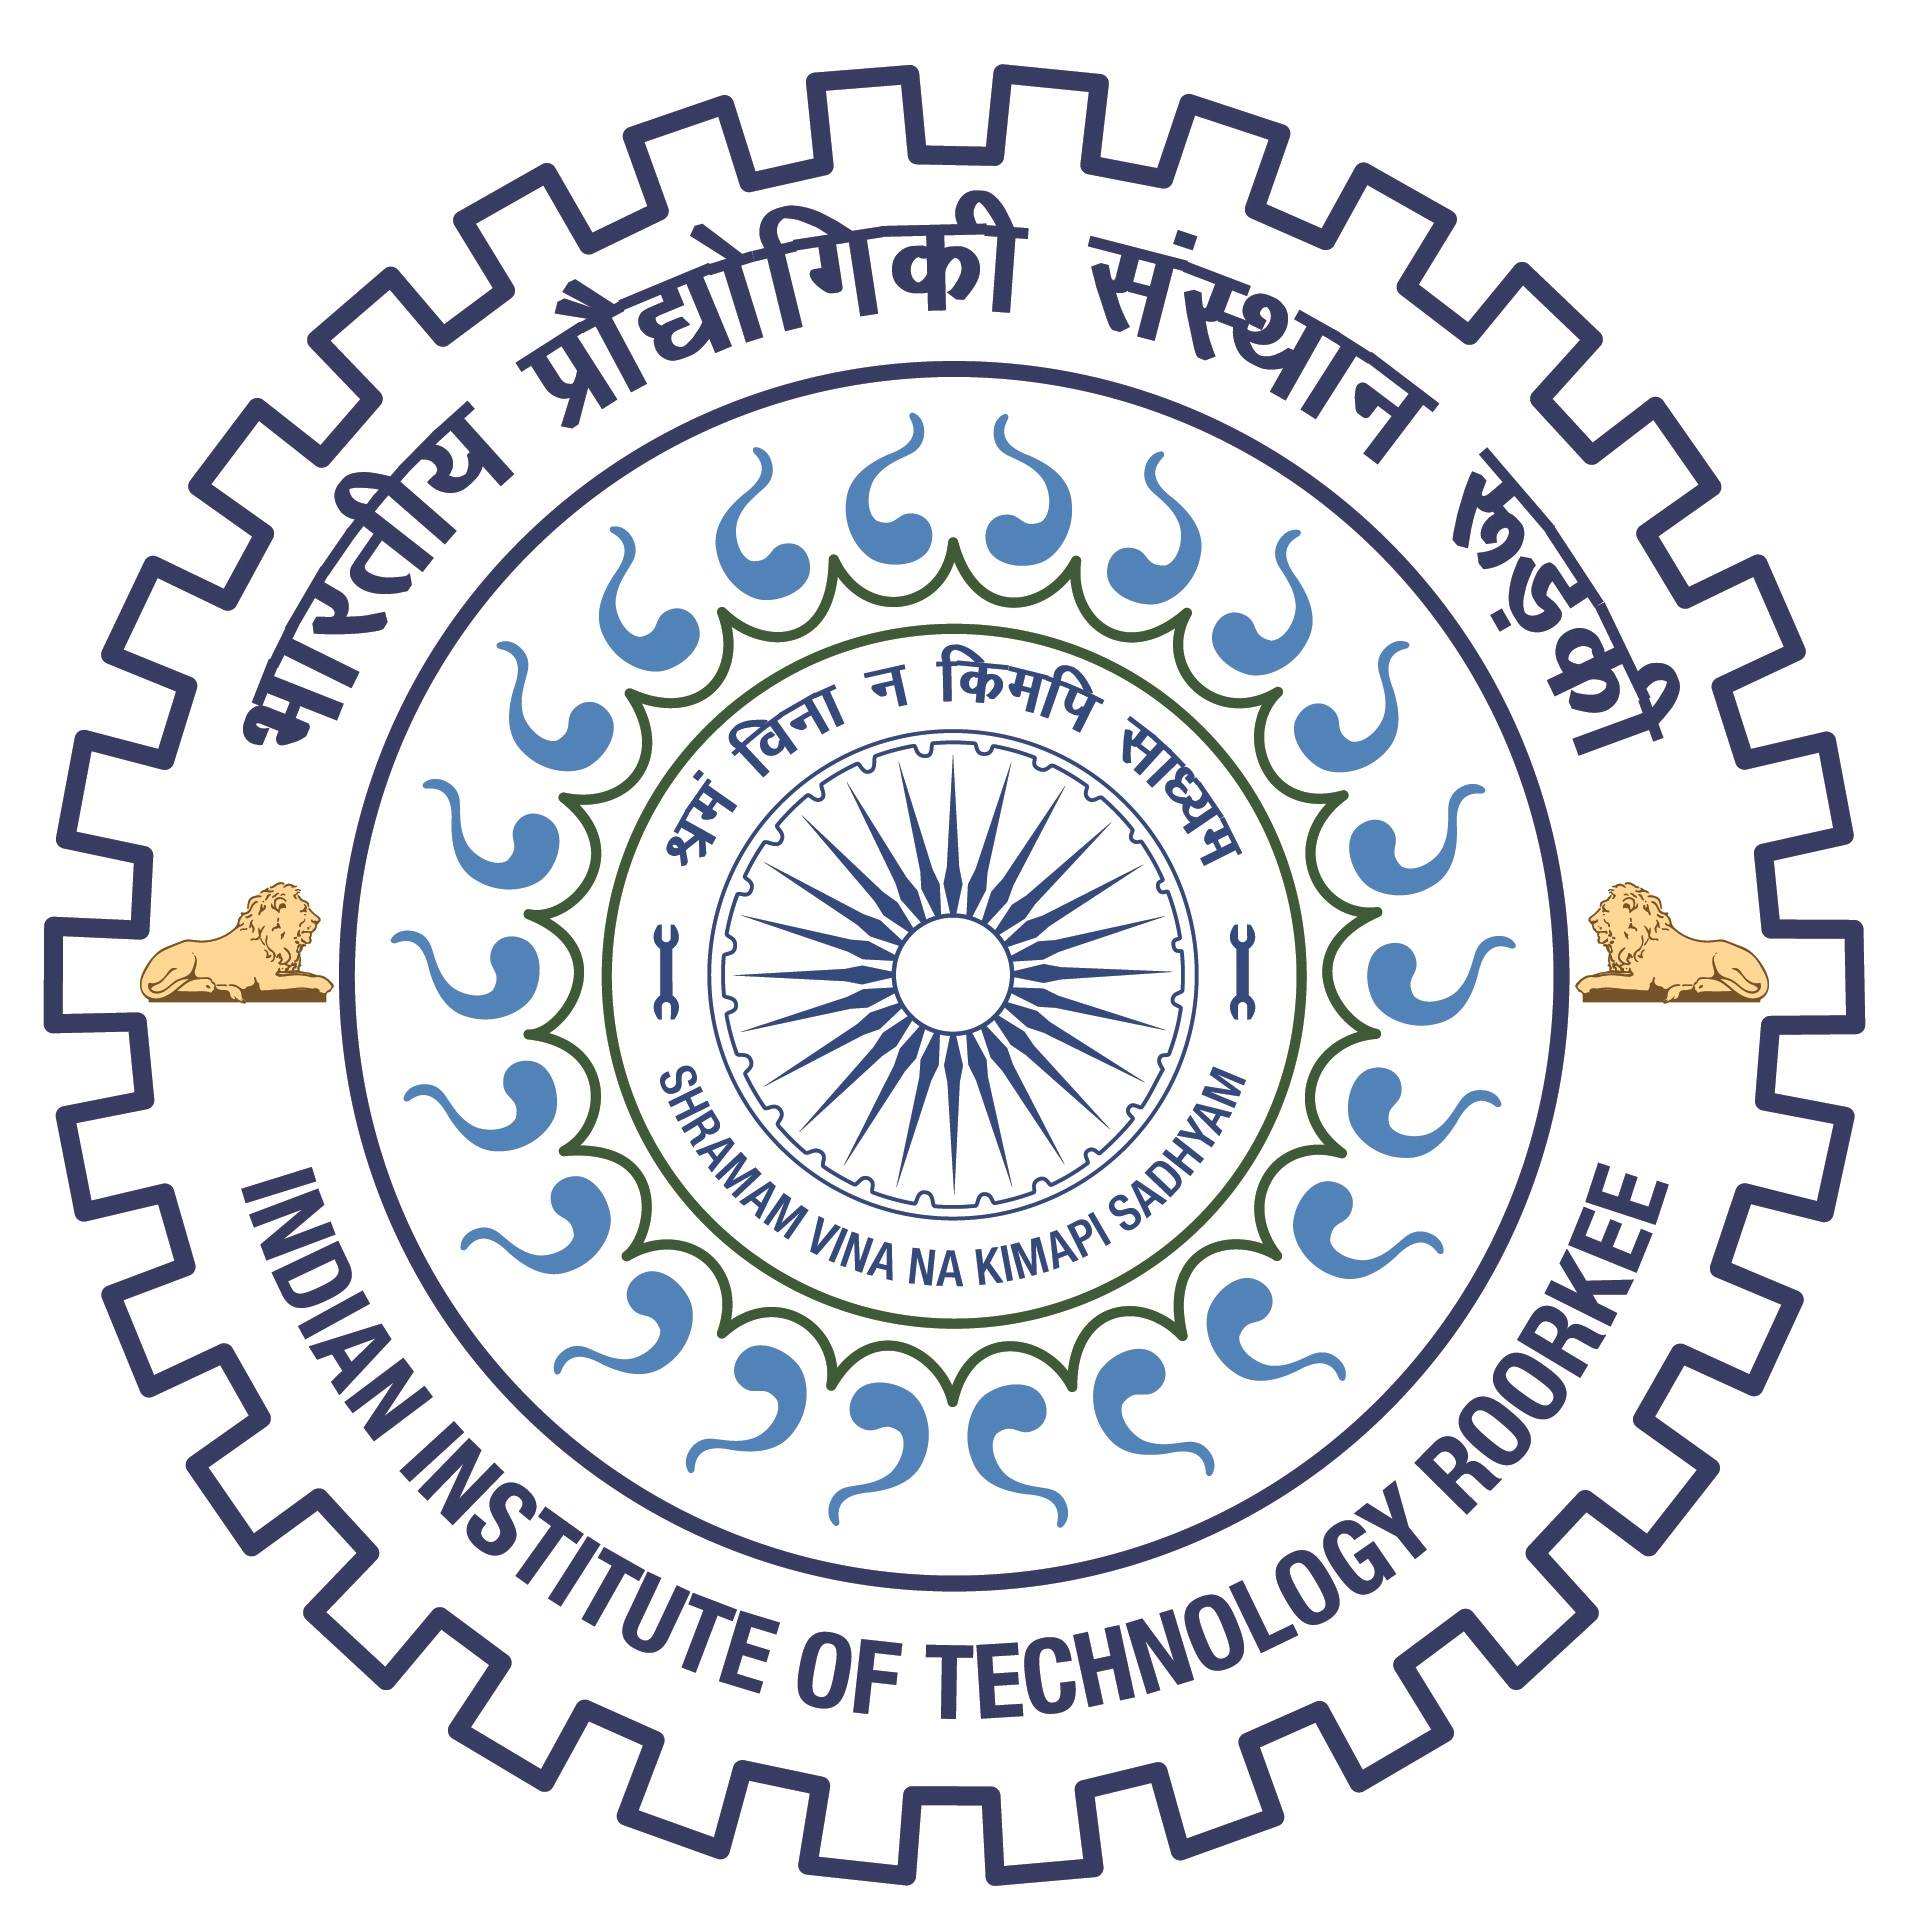 IIT Roorkee Notification 2019 – Openings For Project Assistant Posts